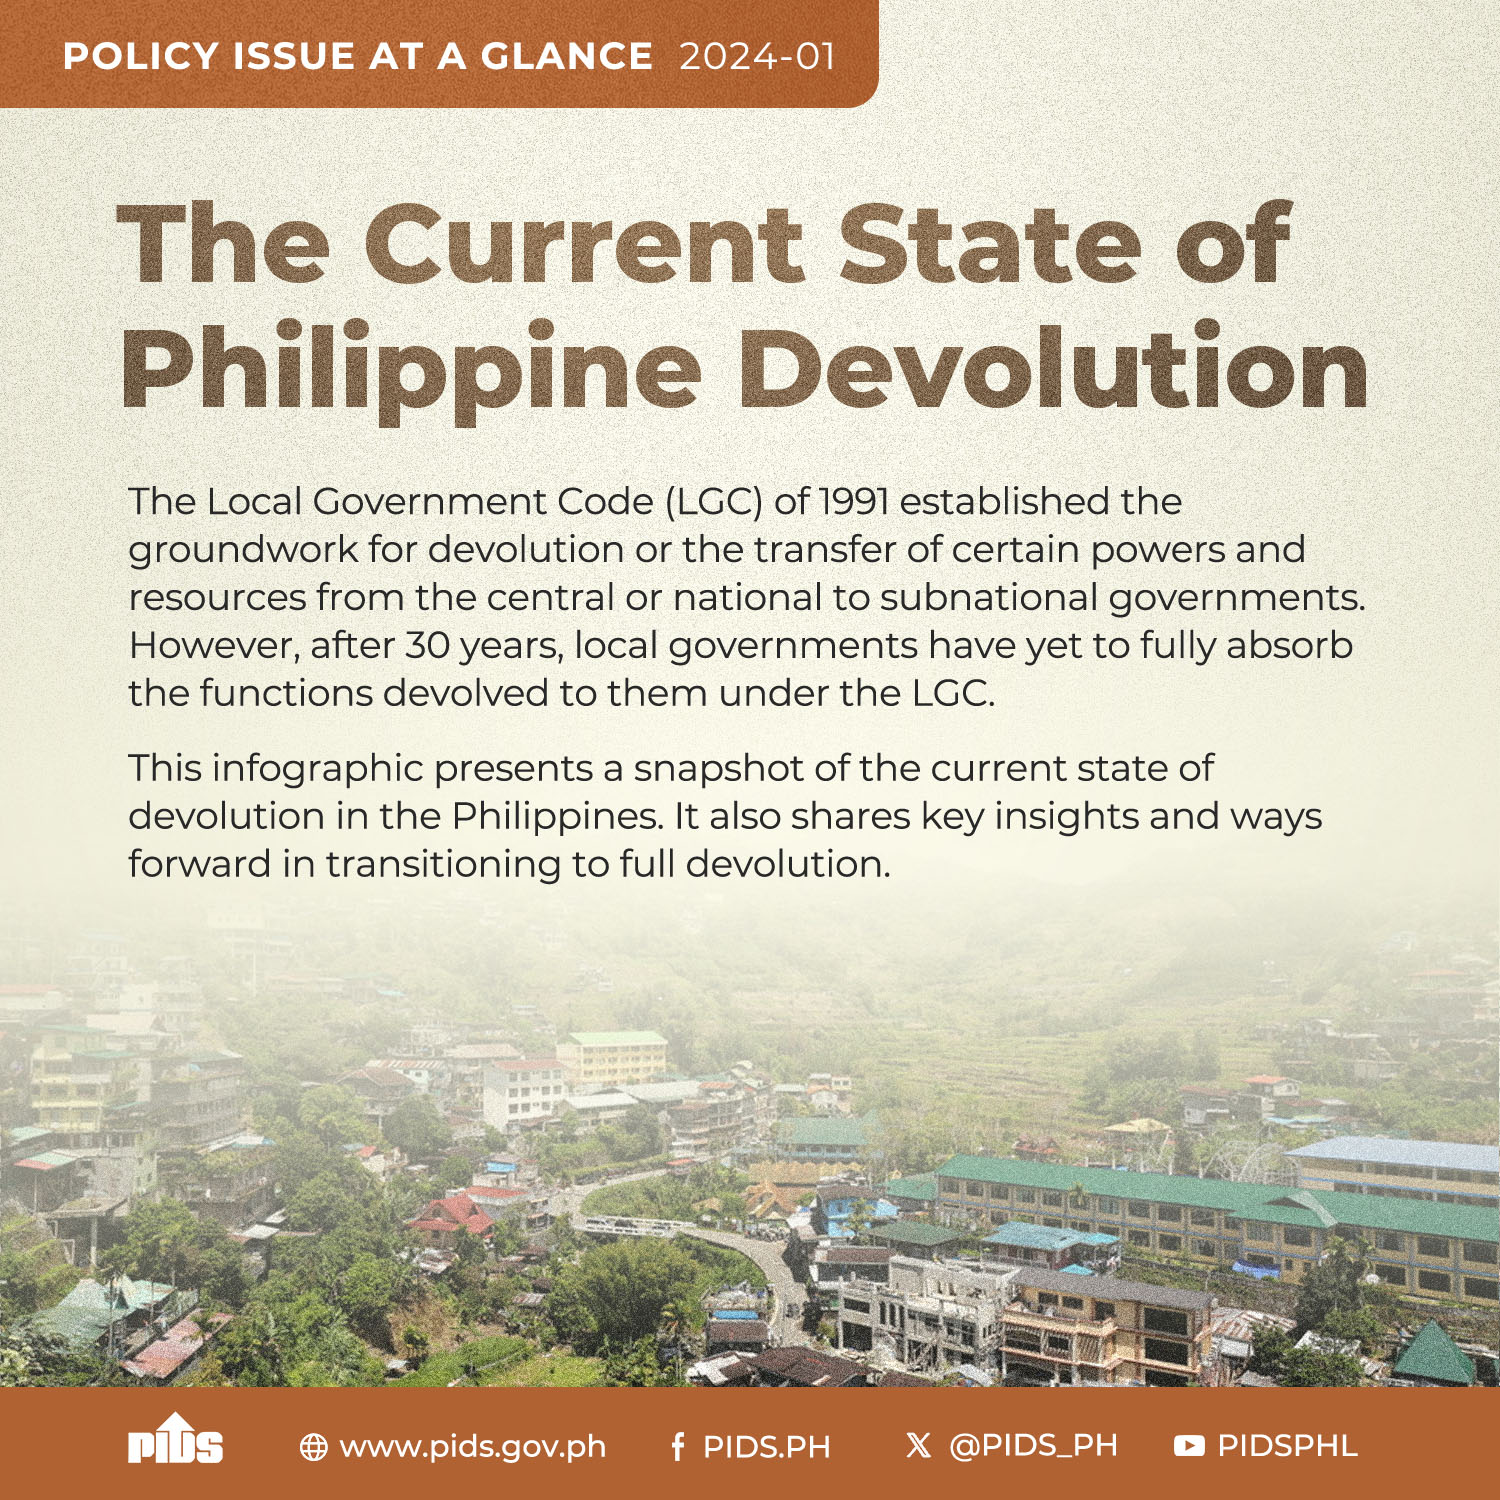 POLICY ISSUE AT A GLANCE: The Current State of Philippine Devolution-2023-11-00.jpg